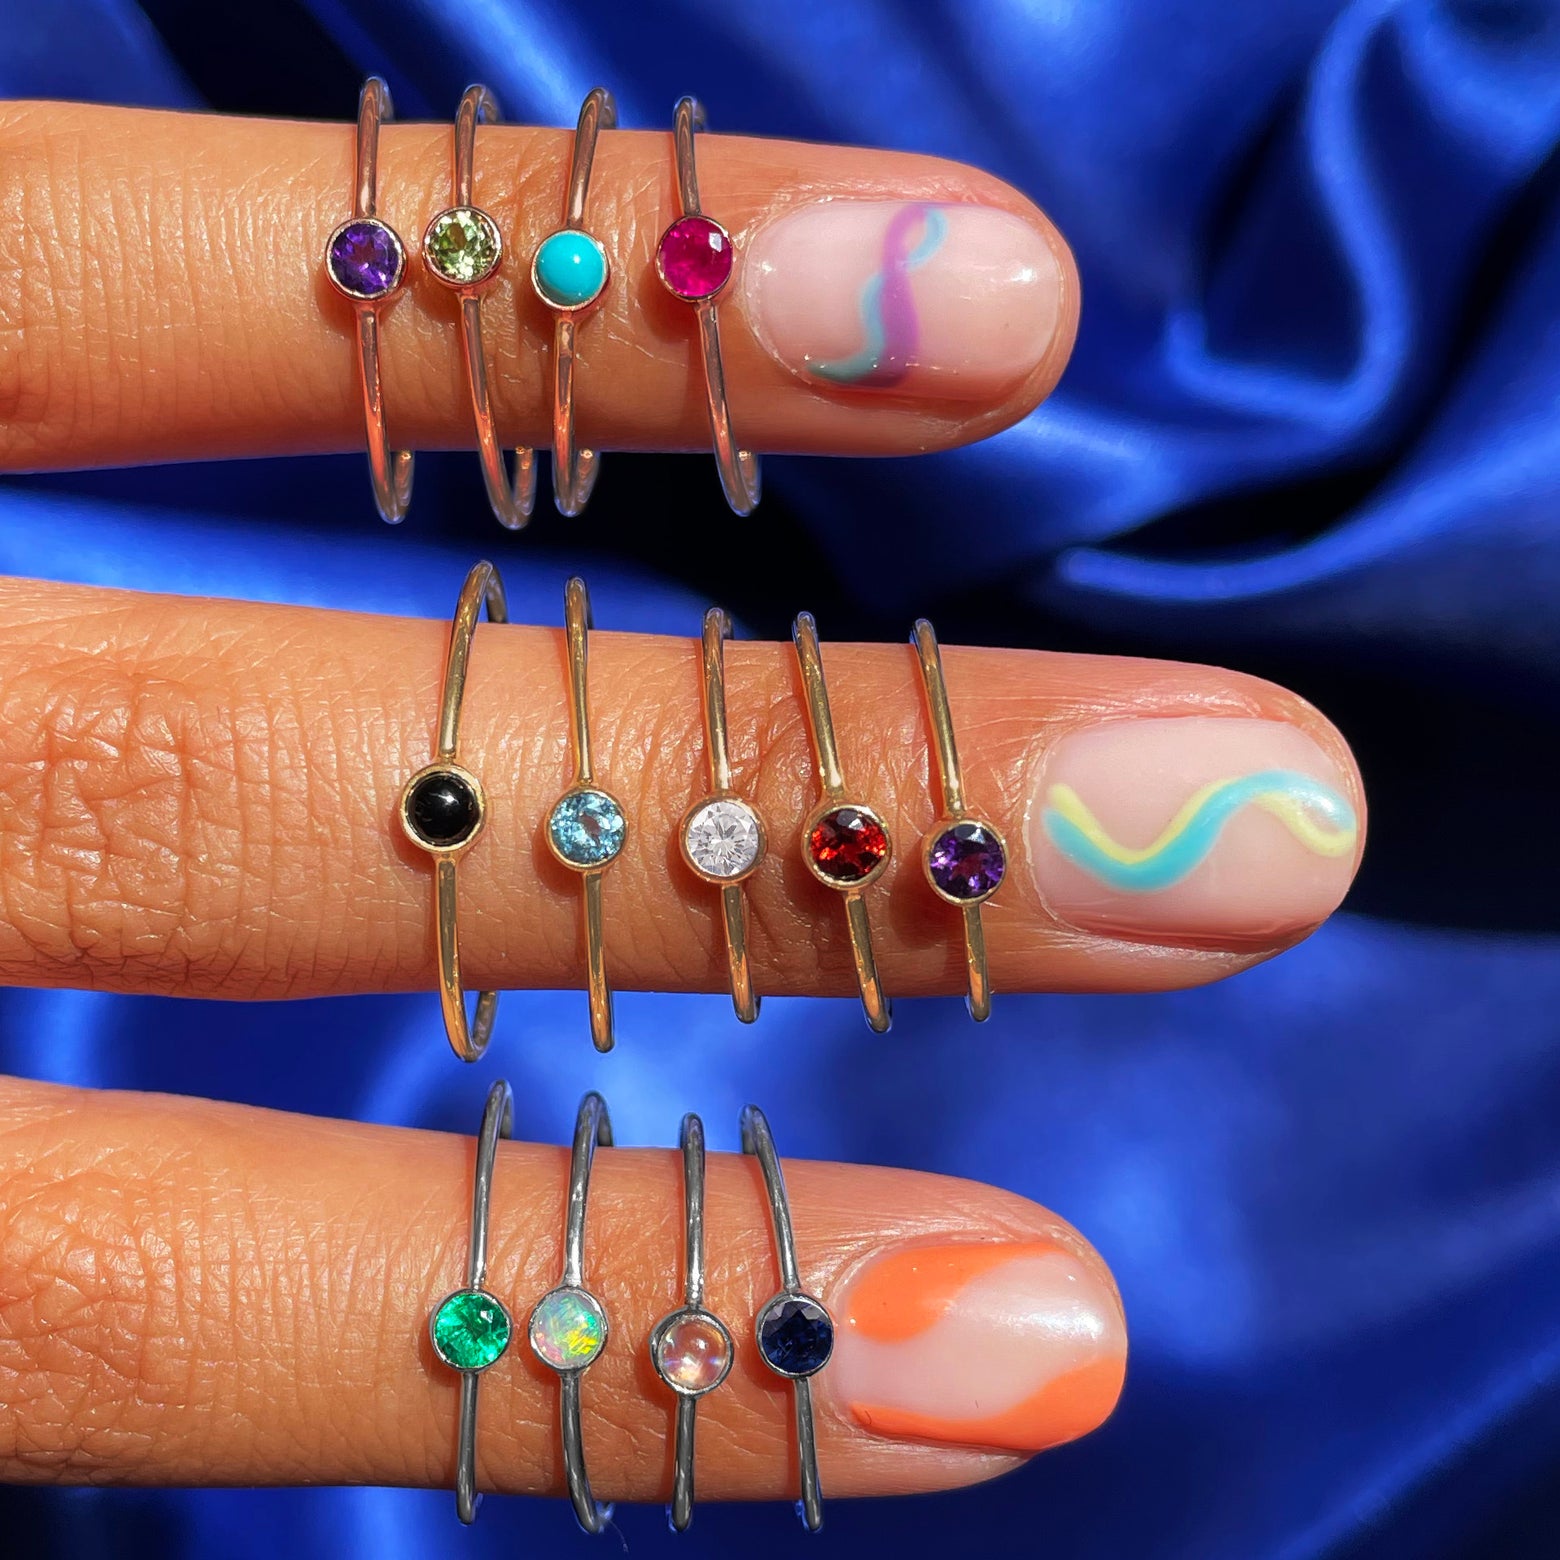 Three fingers with colorful wavy nail polish wearing various Automic Gold rings including an Onyx Ring